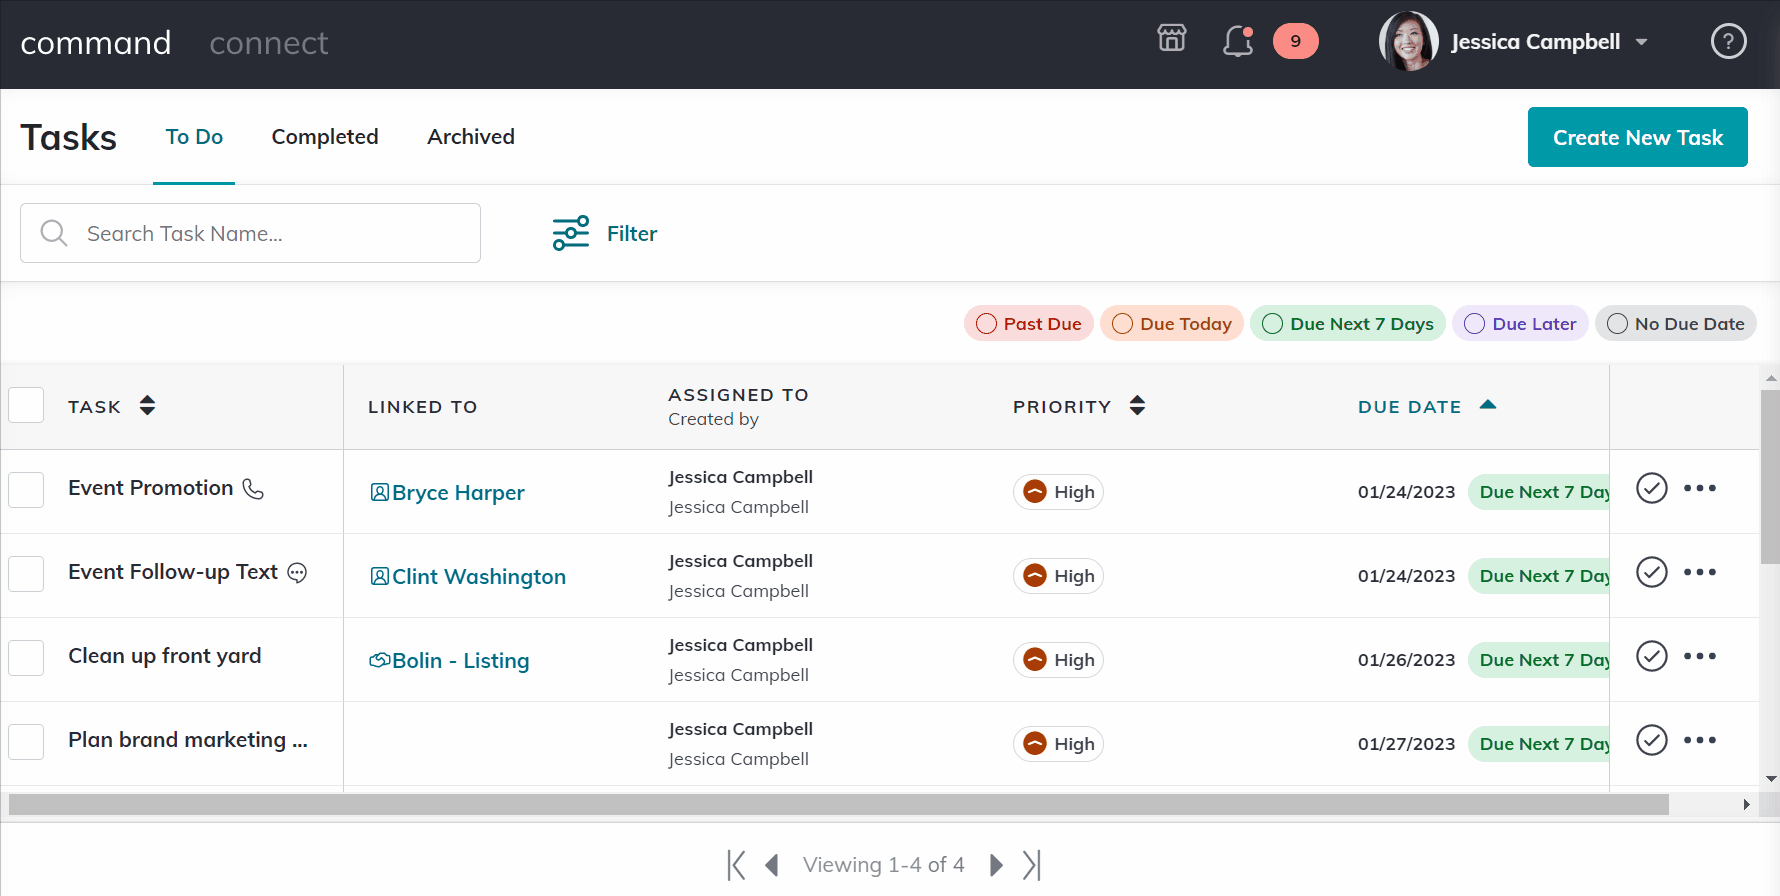 tasks_manage_filters.gif